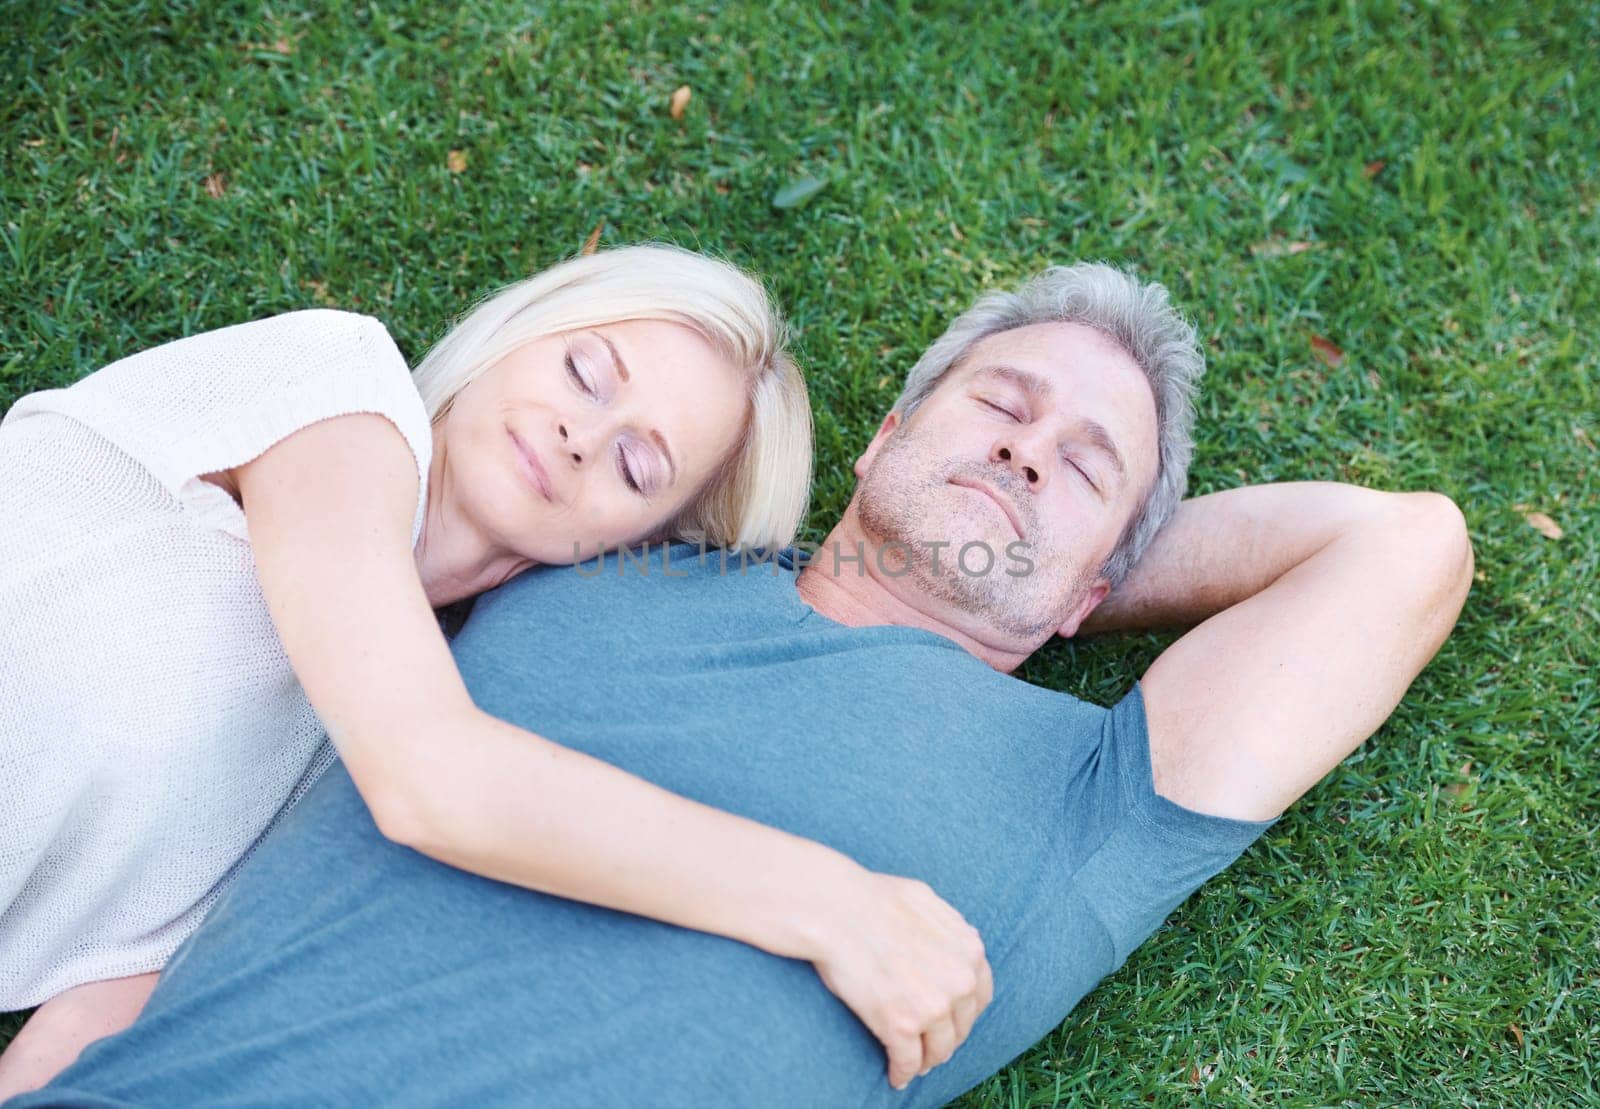 Happy couple, relax and sleeping on grass field with love for embrace, care or support in nature. Top view of man and woman asleep on lawn above with hug for cuddle or relaxation in outdoor romance by YuriArcurs